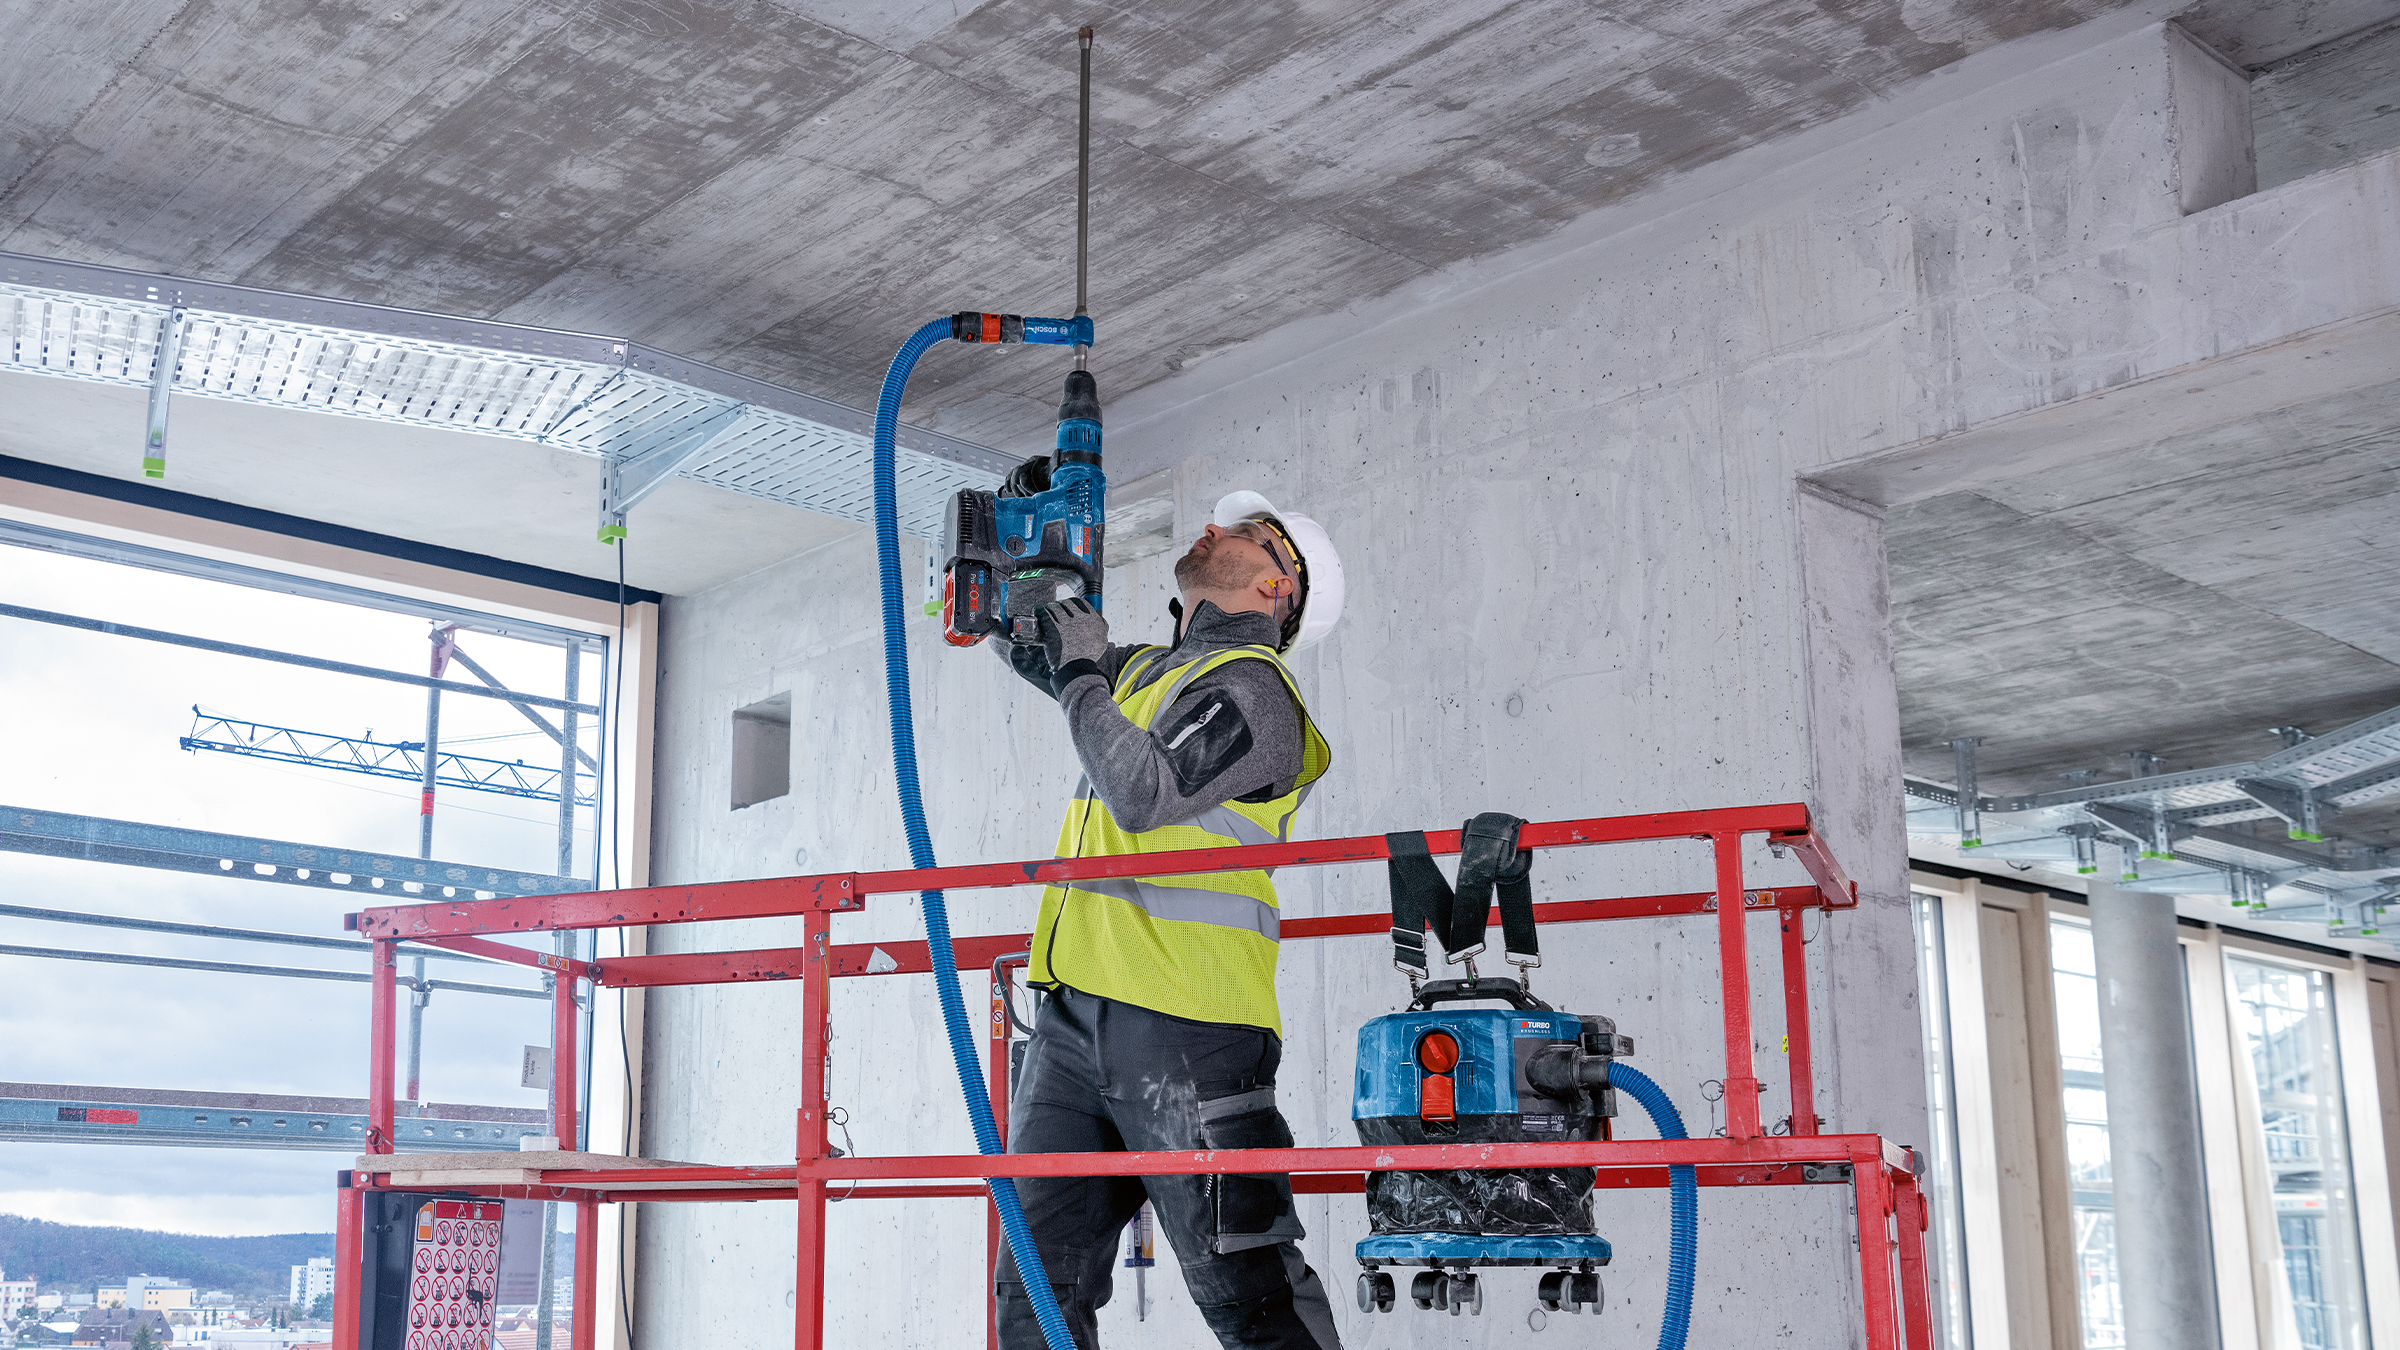 Simple and convenient working with low dust levels: GAS 18V-12 MC Professional from Bosch